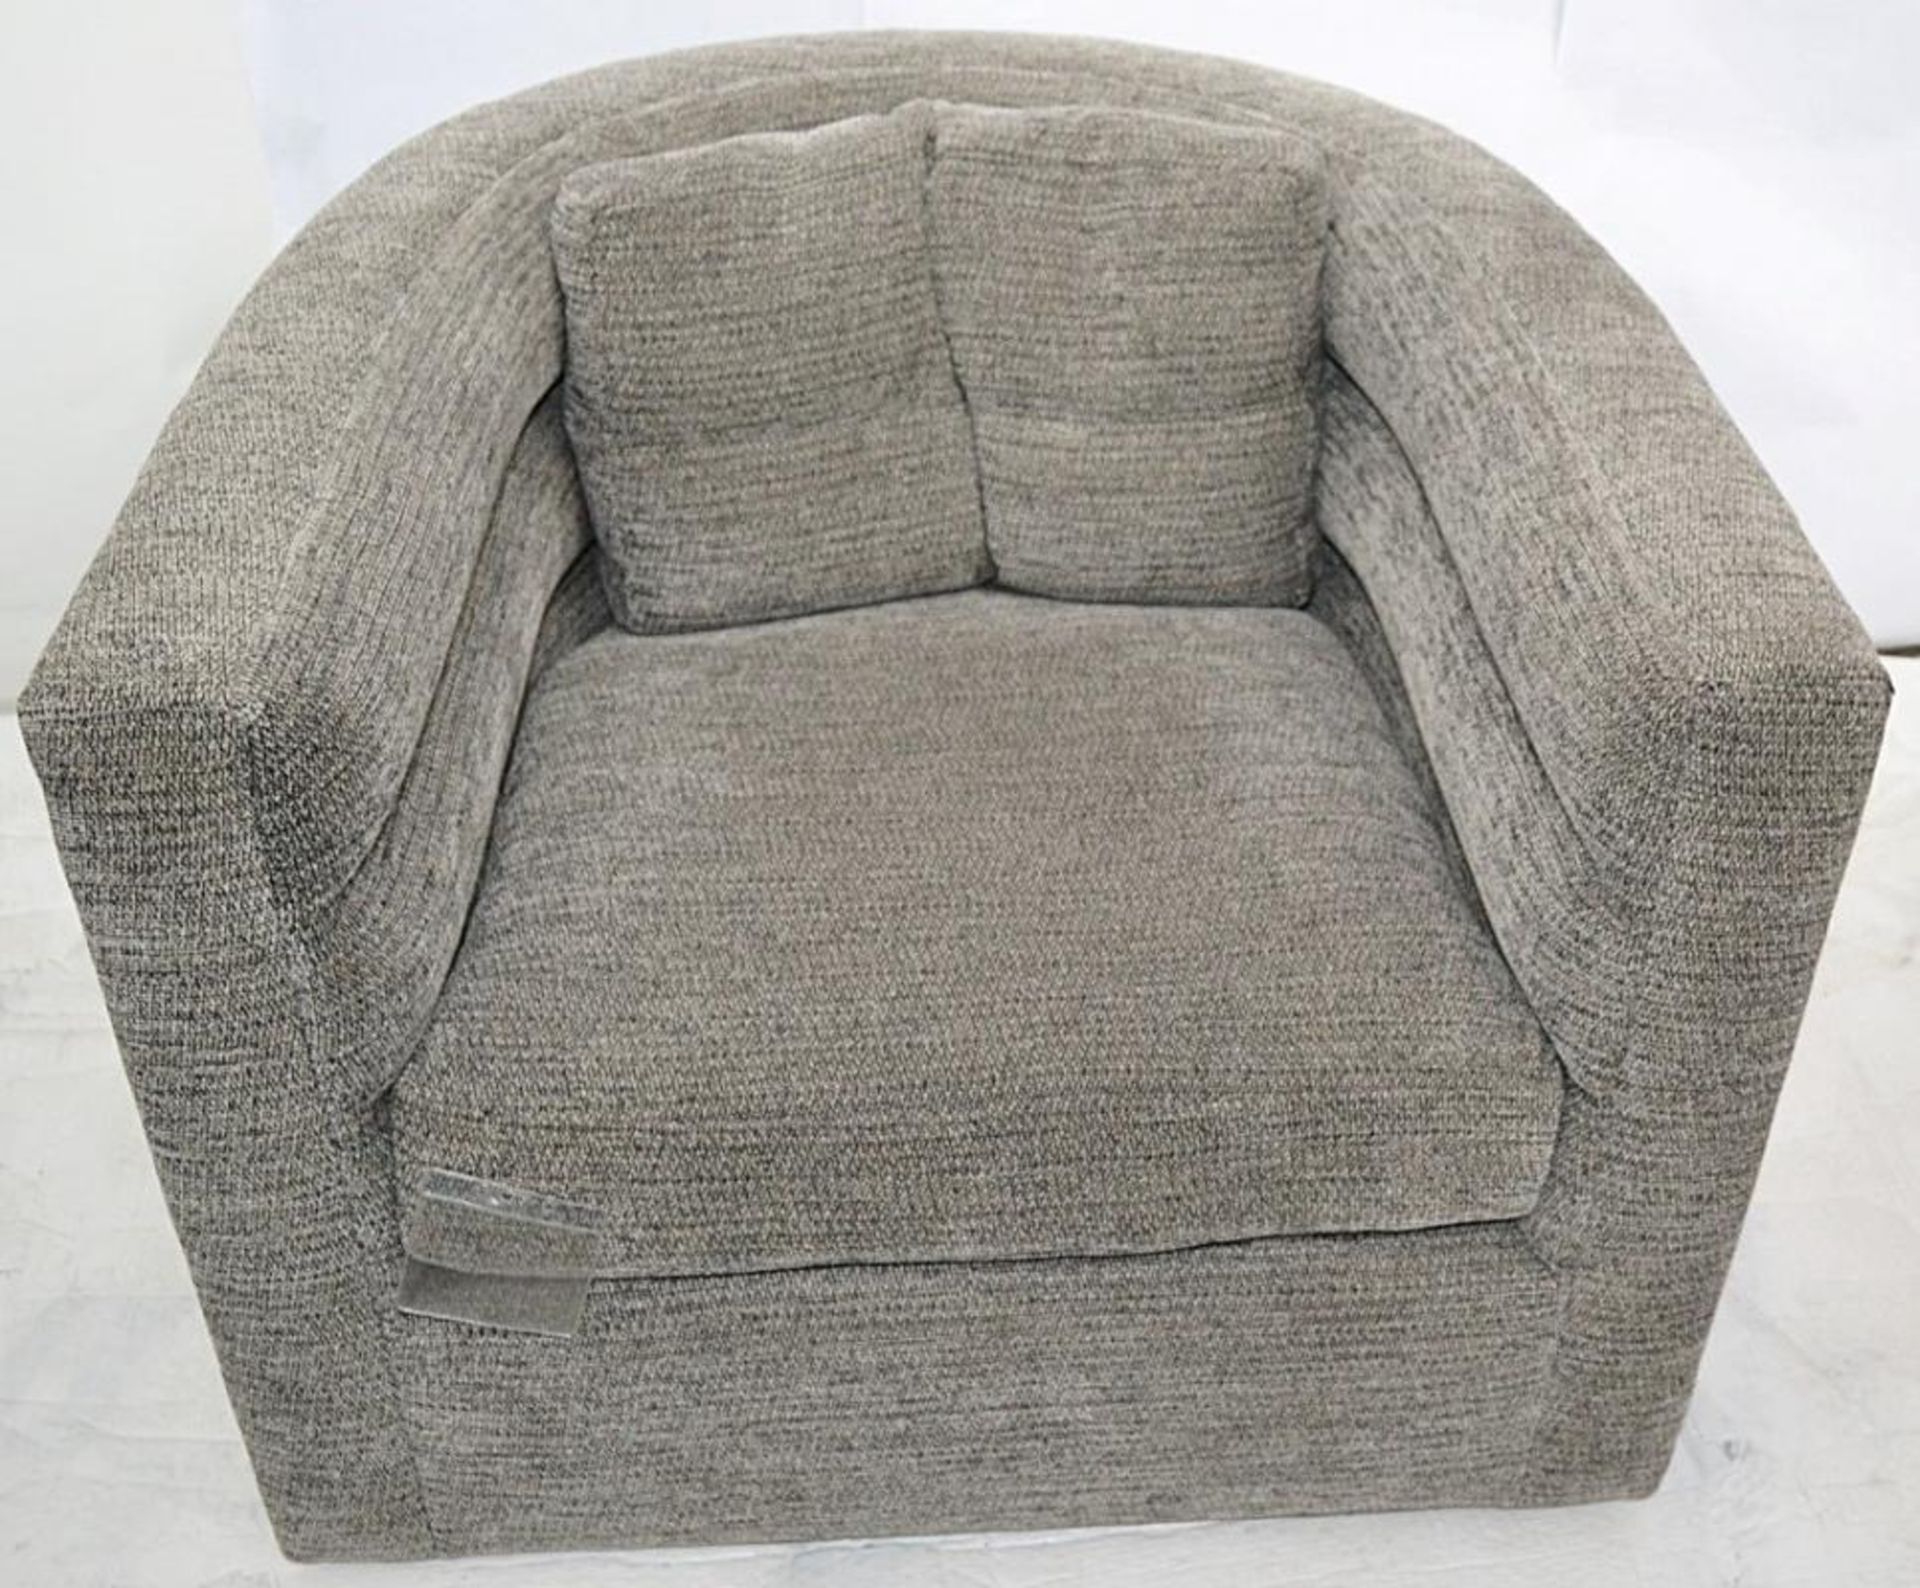 1 x KELLY WEARSTLER Melrose Club Chair In Grey - Dimensions: W36" x D38" x H28" - Ref: 5223289 - CL0 - Image 17 of 24